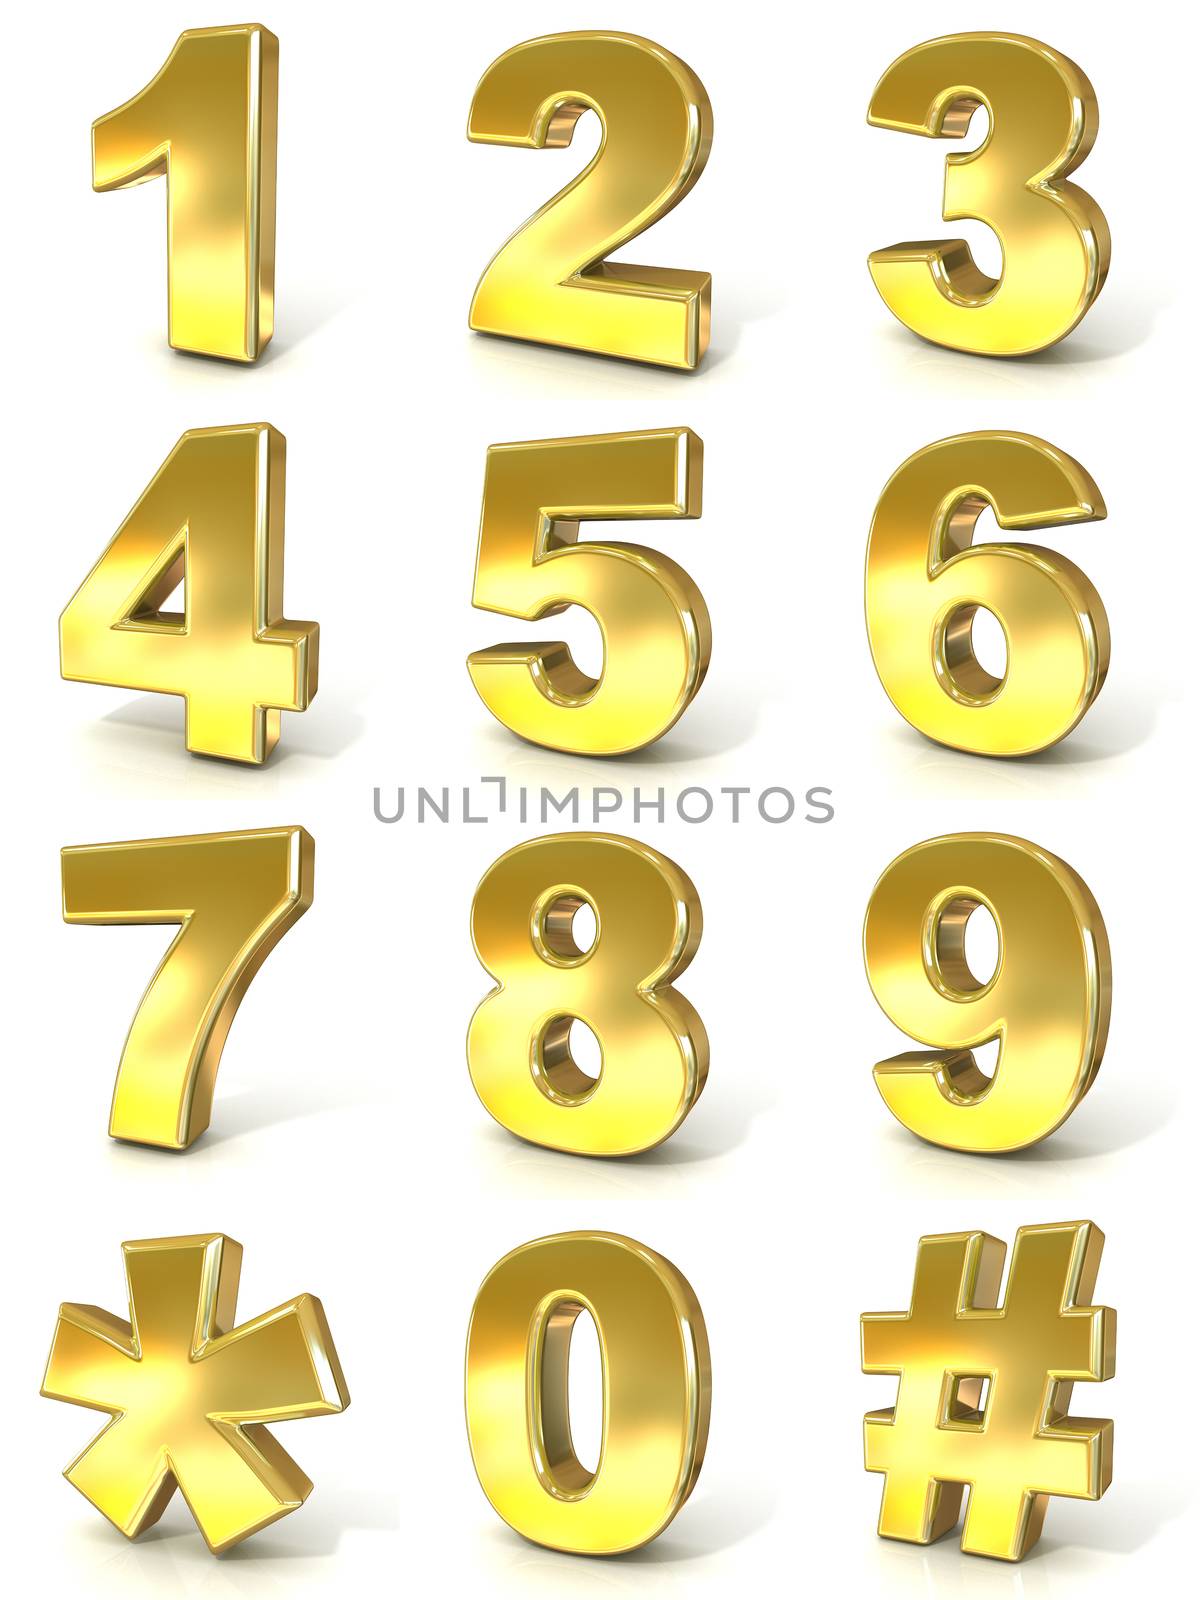 Numerical digits collection, 0 - 9, plus hash tag and asterisk. 3D golden signs isolated on white background. Render illustration.